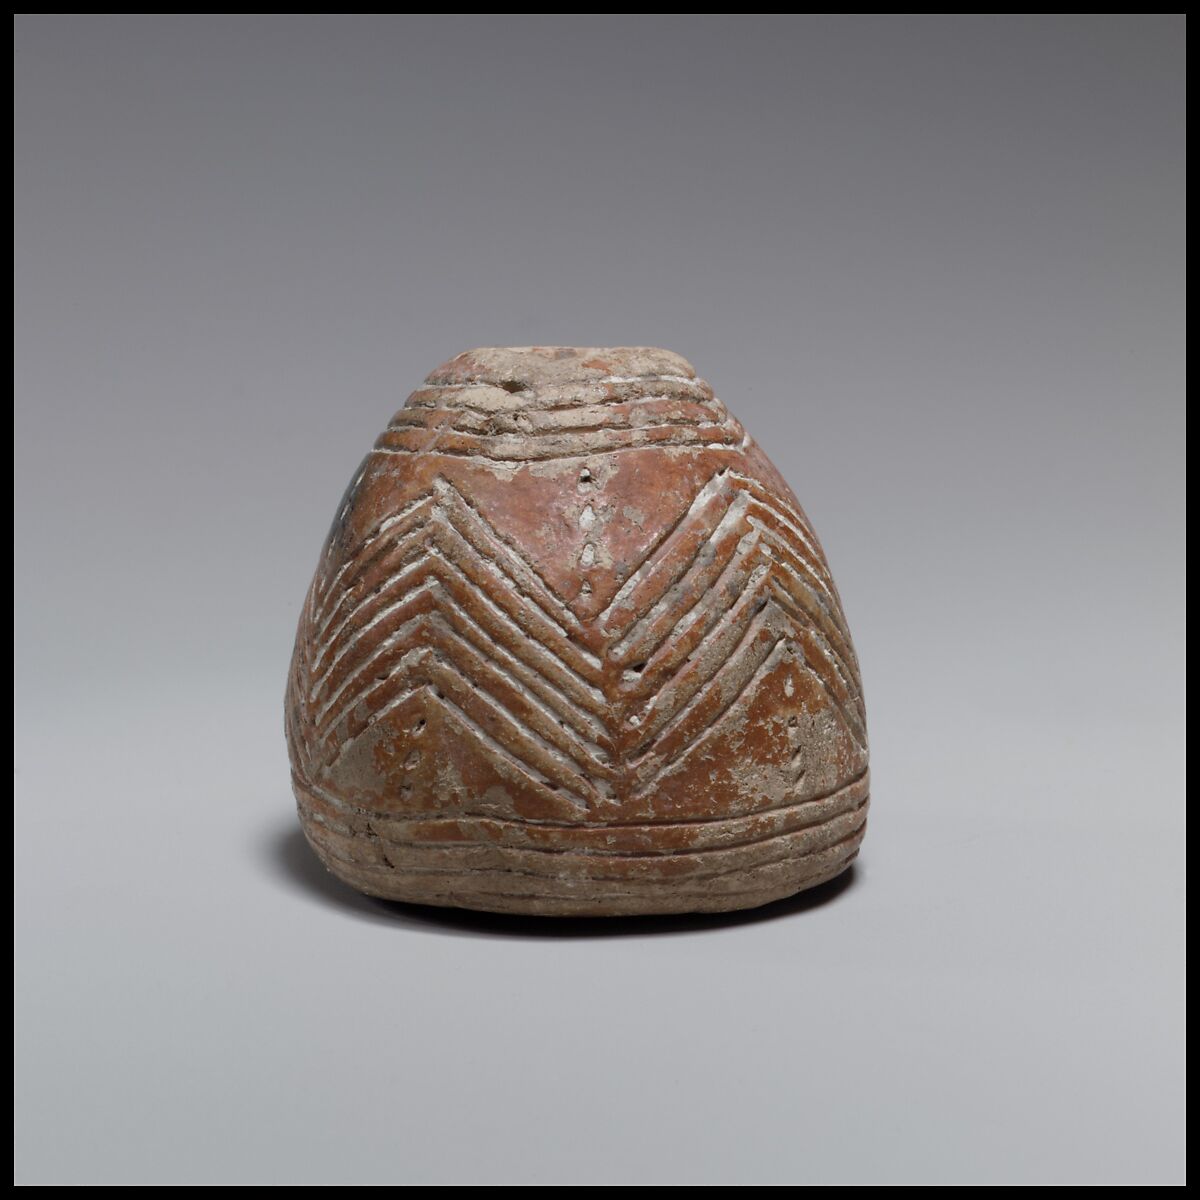 Terracotta conical-hemispherical spindle-whorl with flat base, Terracotta, Cypriot 